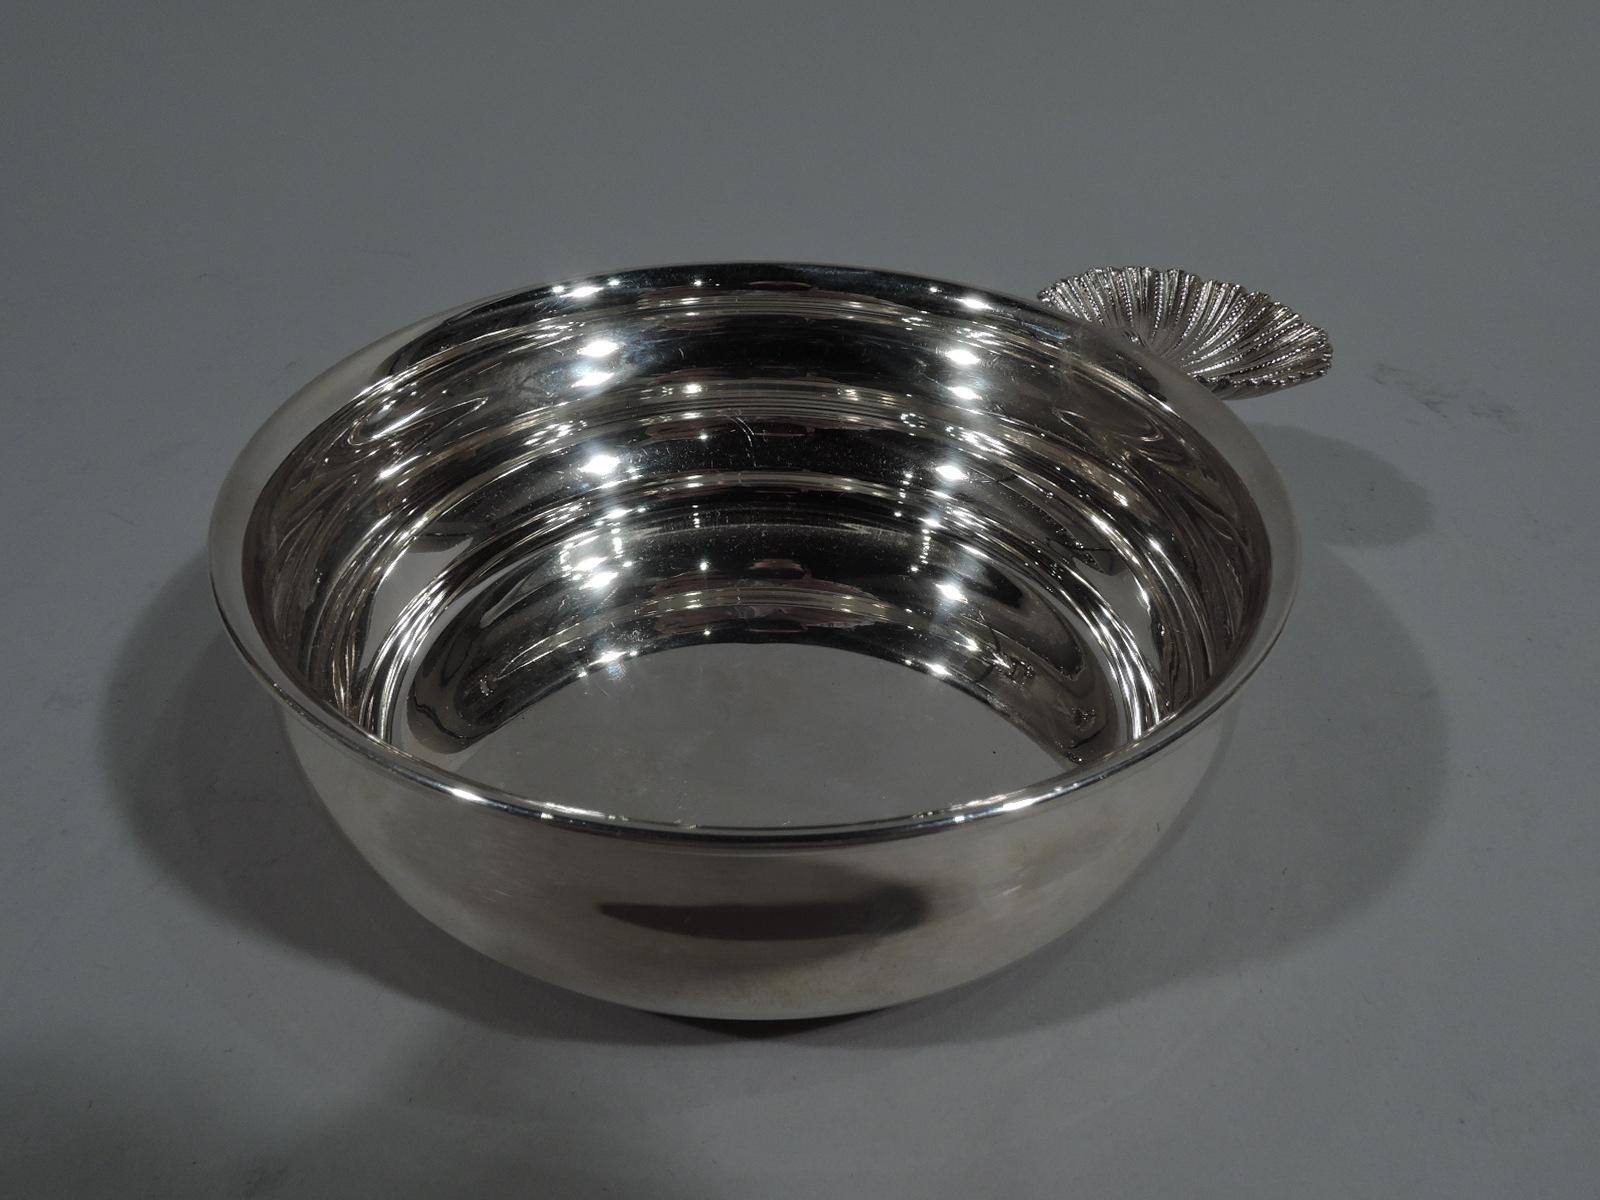 Classical sterling silver baby gift. Made by Buccellati in Milan. Round and curved bowl with inset foot and scallop shell handle. A stylish baby gift. Marked “Buccellati / Sterling”. Weight: 5 troy ounces.